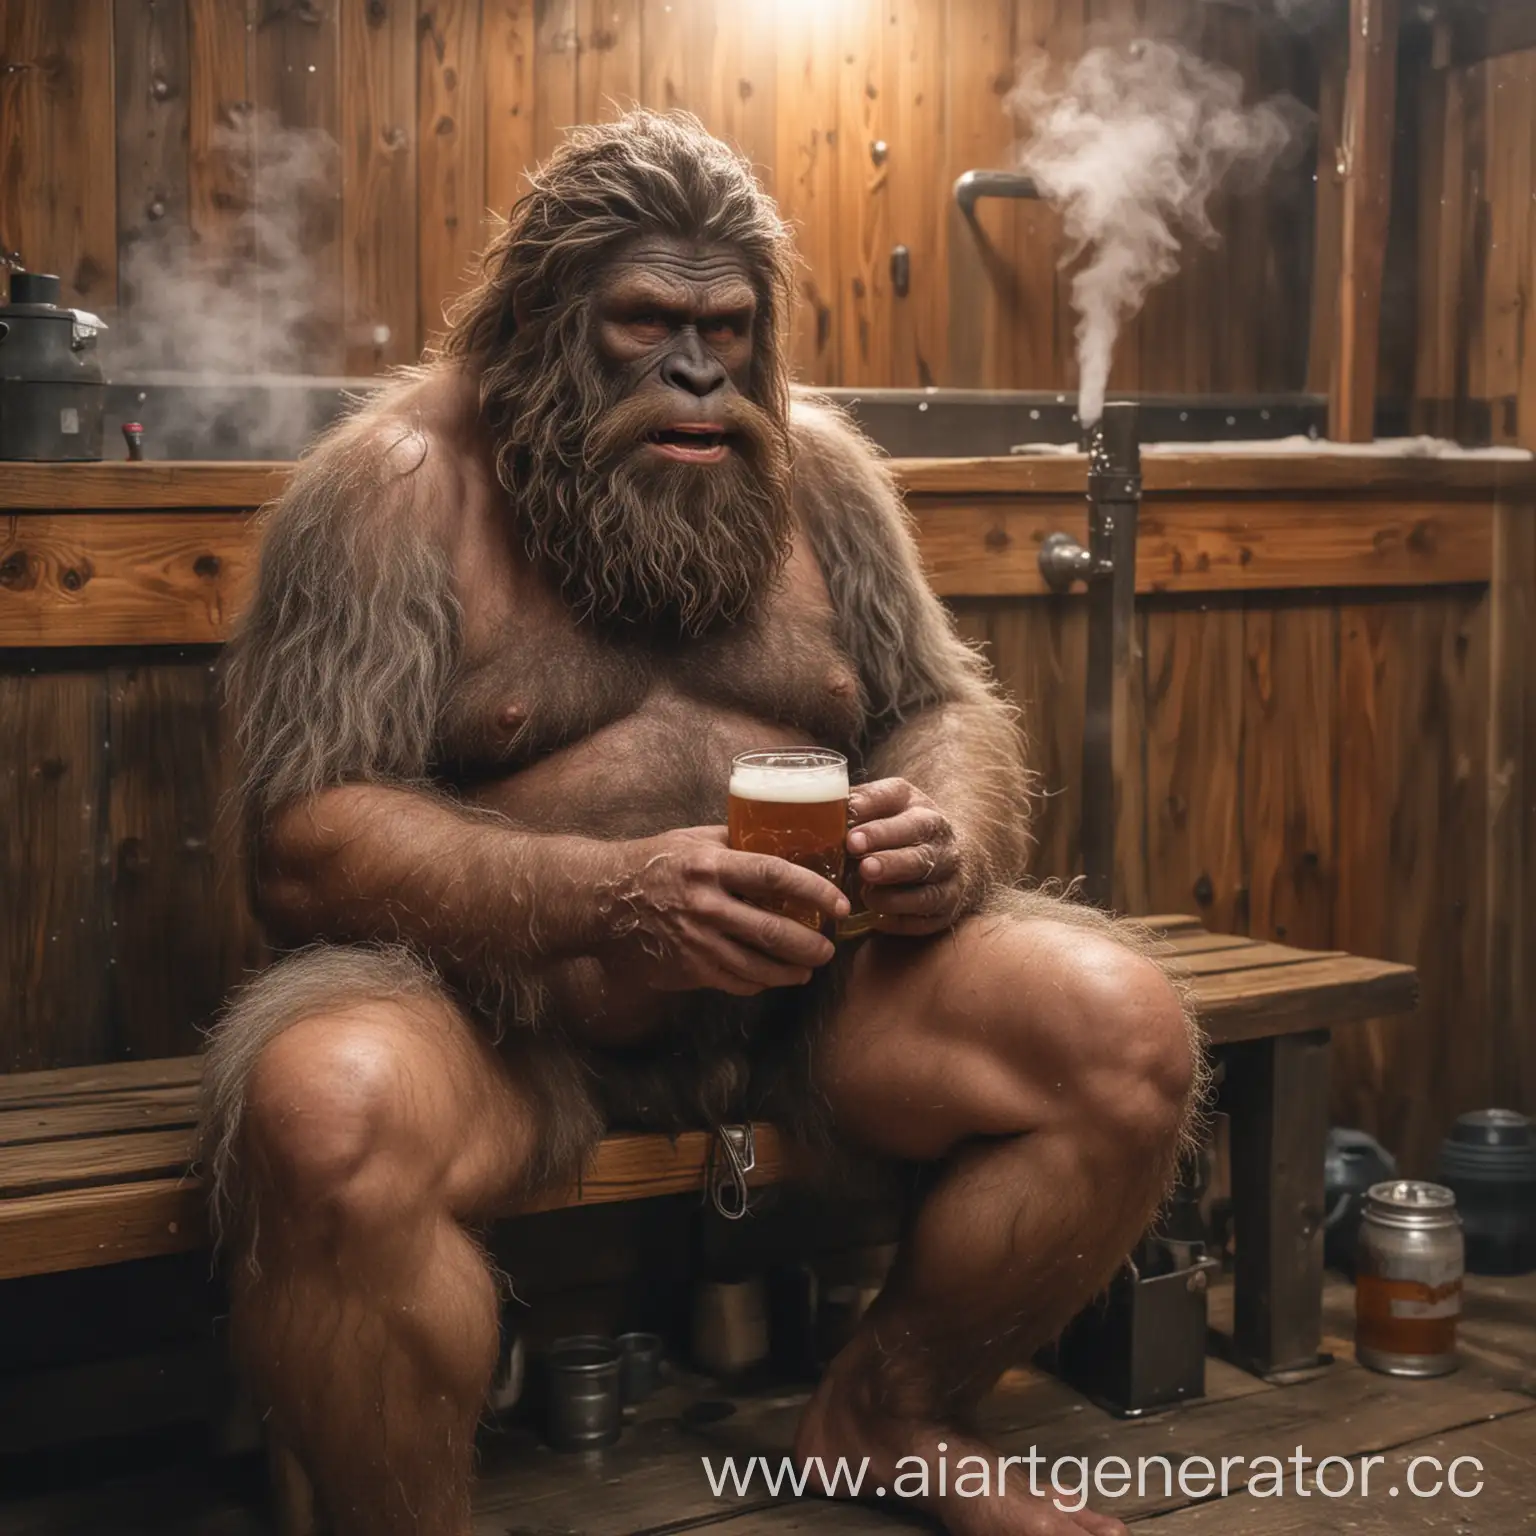 Bigfoot-Relaxing-with-a-Cold-Beer-in-a-Steamy-Bathhouse